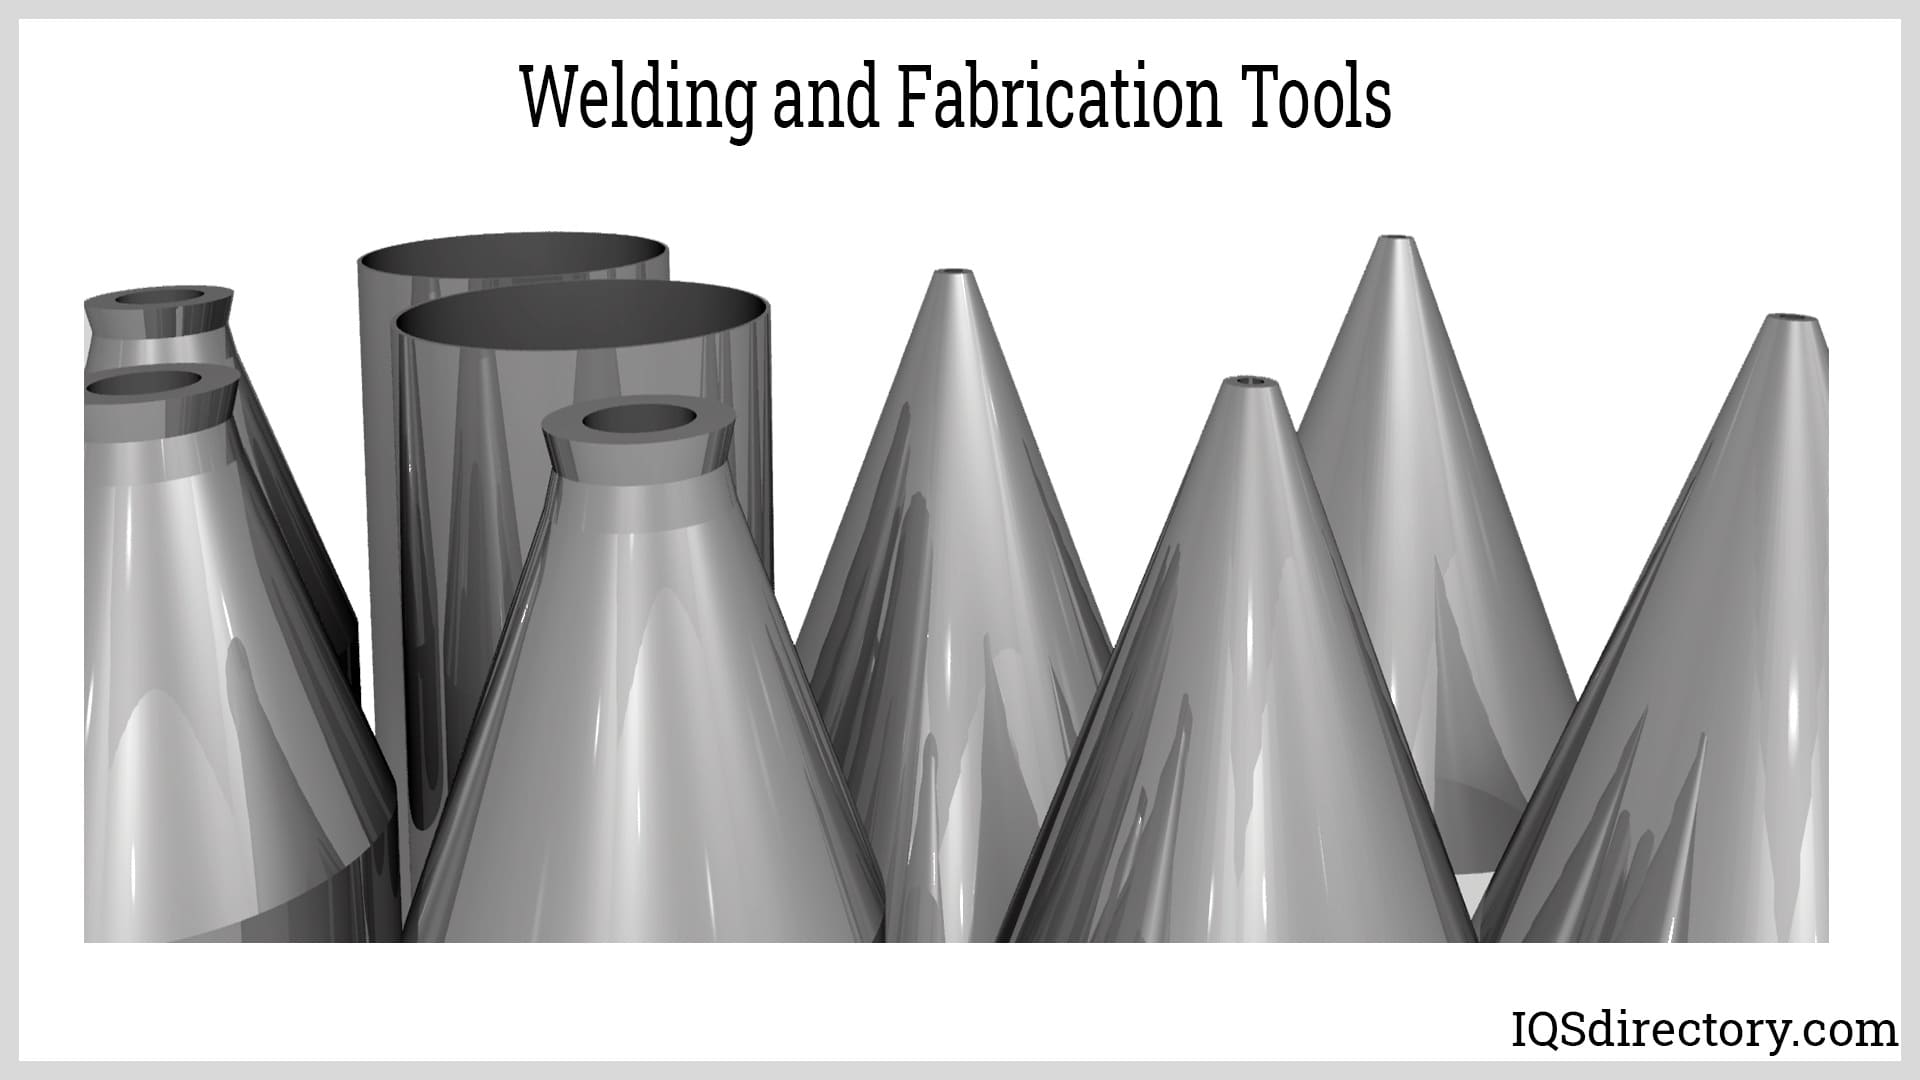 Welding and Fabrication Tools